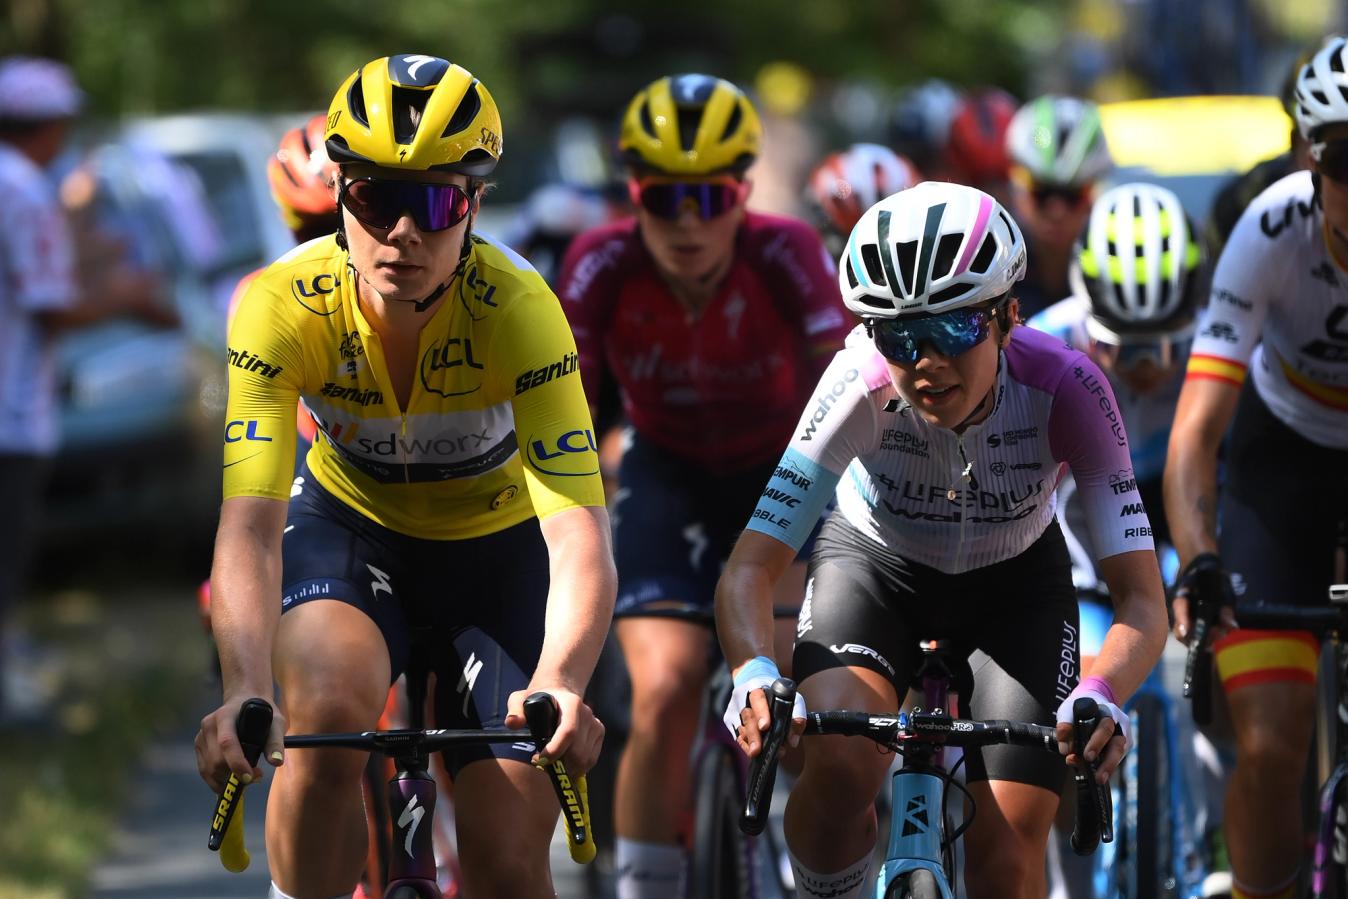 Ella Wyllie (right) competed with the best in the world at the Tour de France Femmes avec Zwift, earning plenty of rightful plaudits along the way